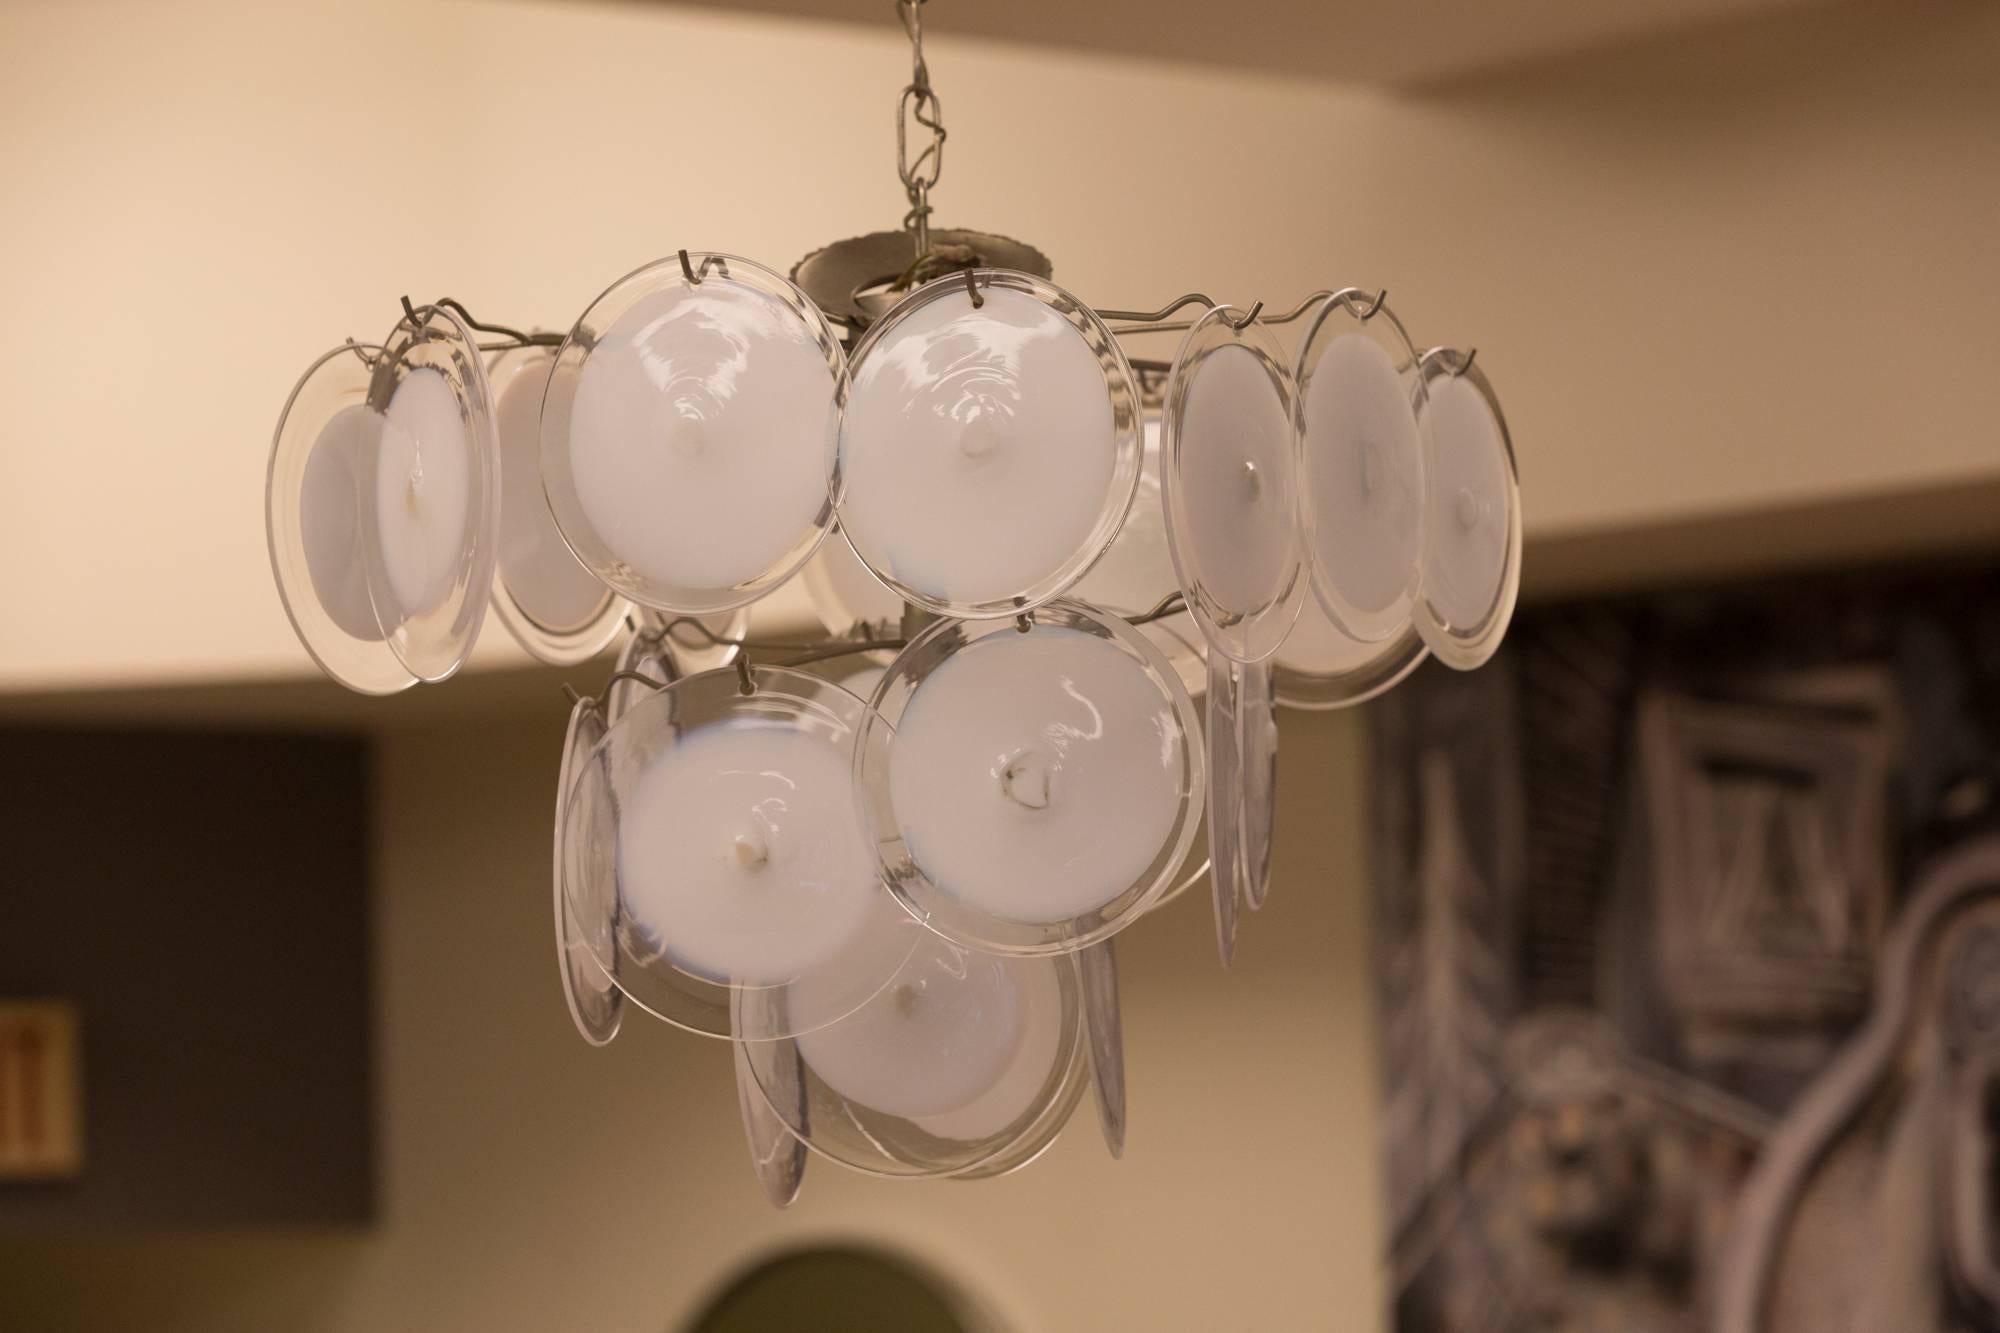 Disk chandelier in Murano glass by Vistosi.
 6"dia. white and clear glass disks 
mounted on nickel finished Wire frame 
with 3 sockets, matching Chain with 
decorative ceiling mount.